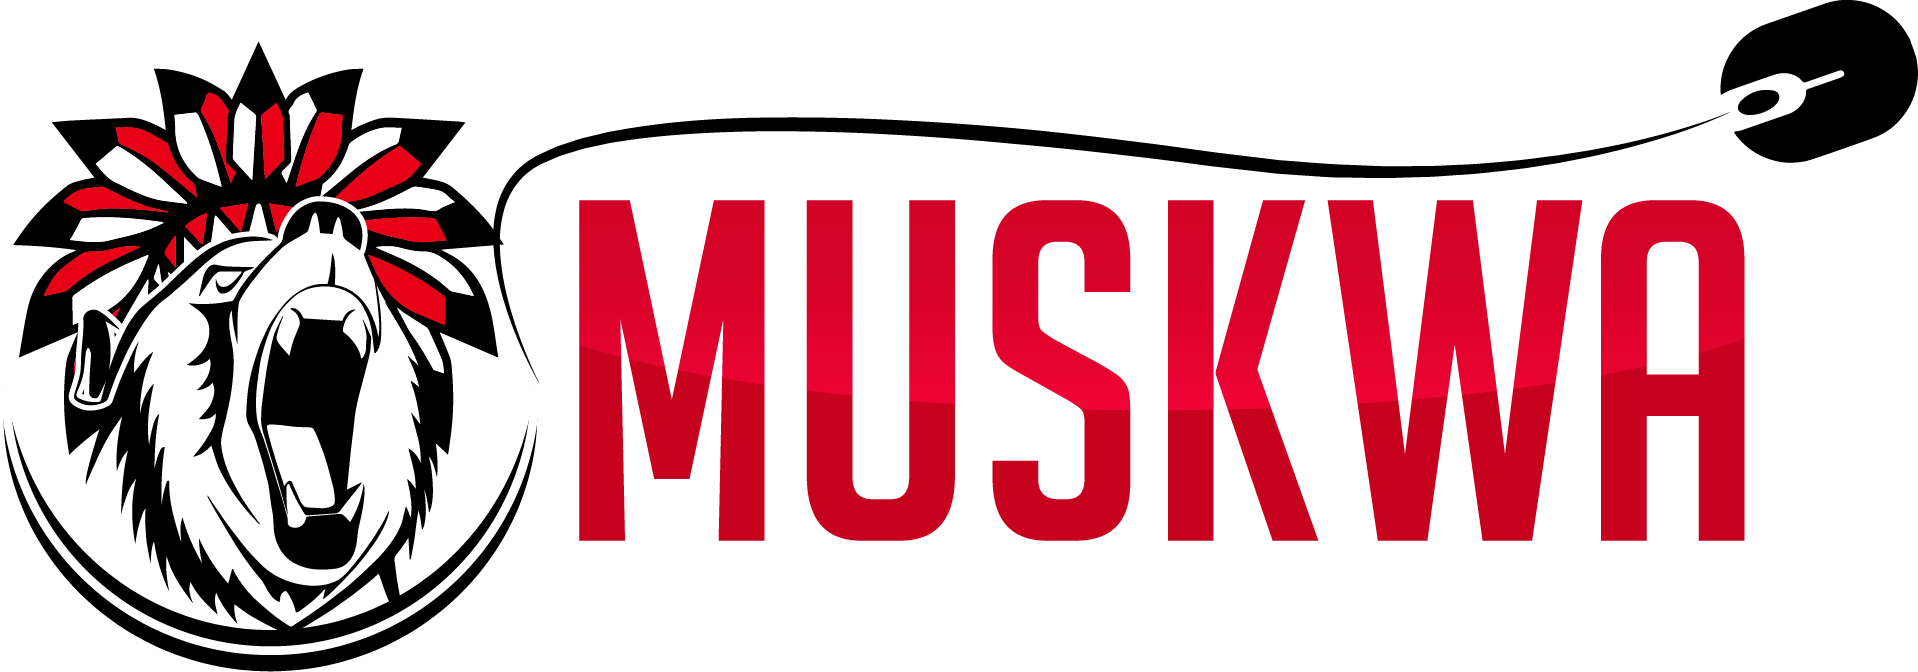 Muskwa Computer Sciences Corp.